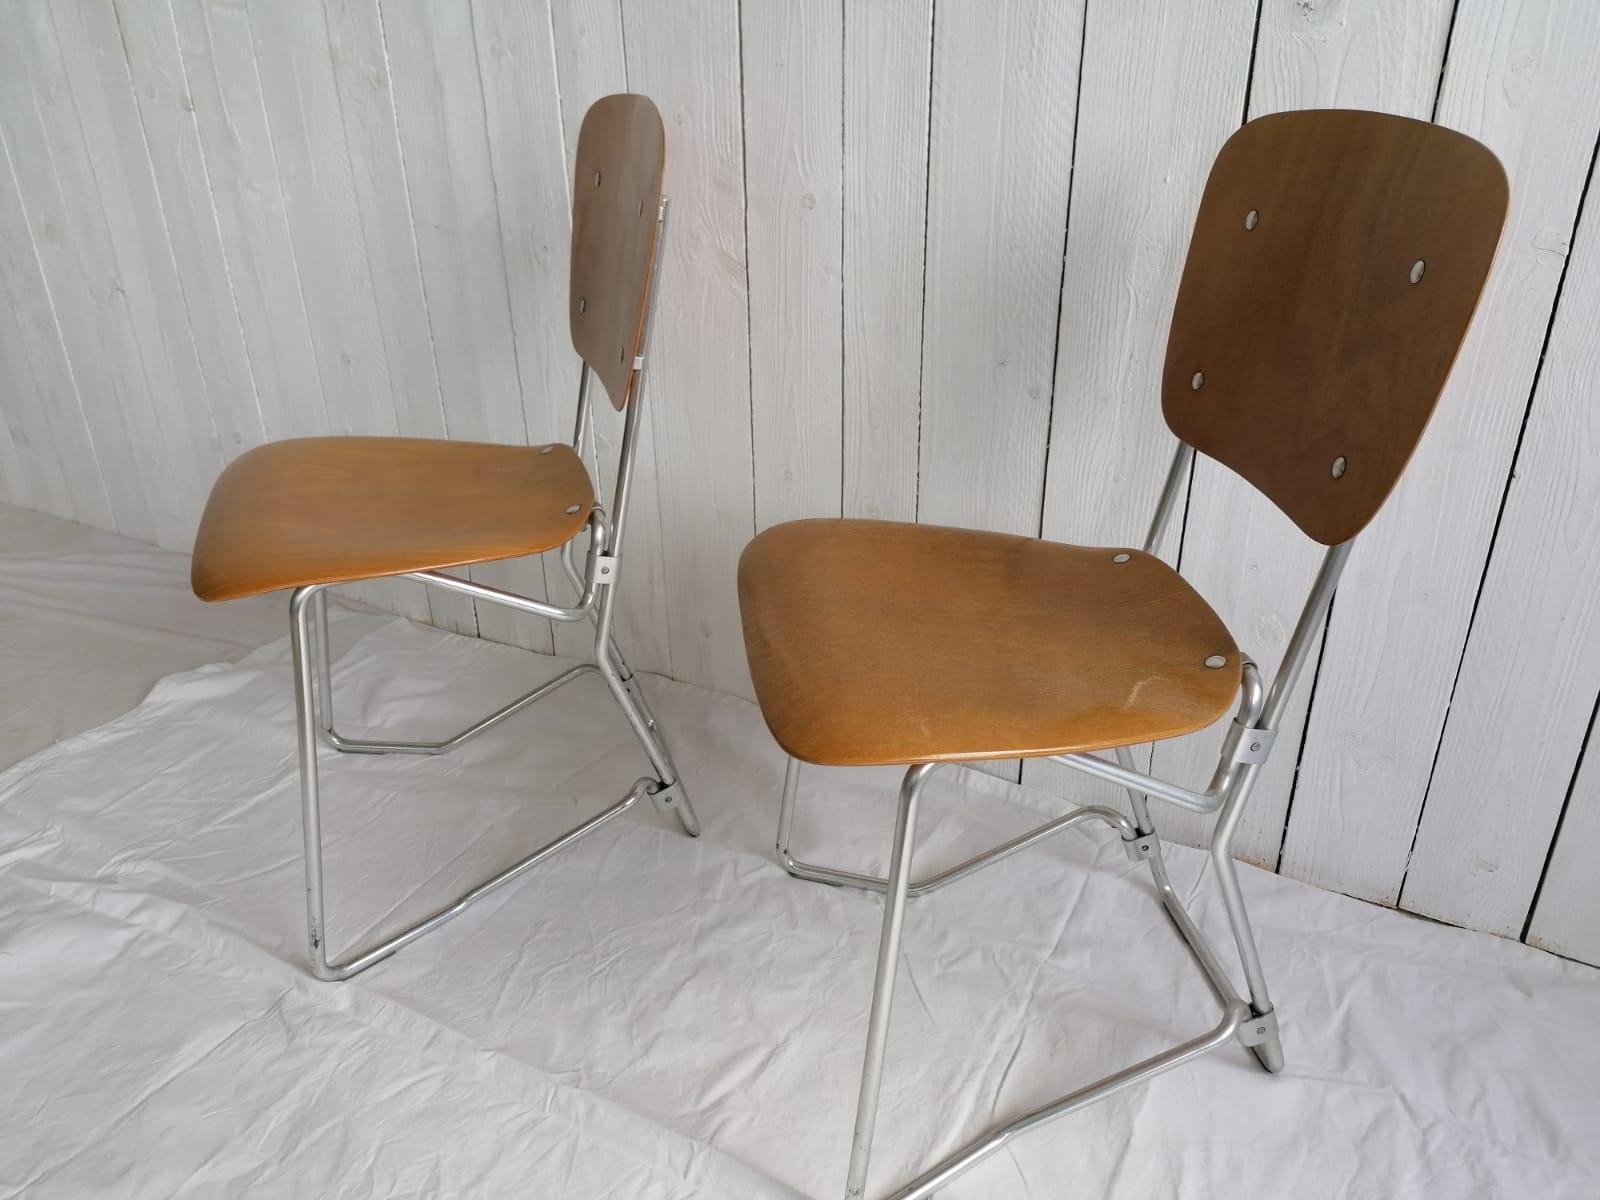 Folding chairs designed by Armin Wirth for Aluflex, 1951. Early production in the 1950s. Very nice patina to the beech lacquered wooden seats and backs. Very nice and clean condition, all marked with the Aluflex tag at the back. The chairs seats are